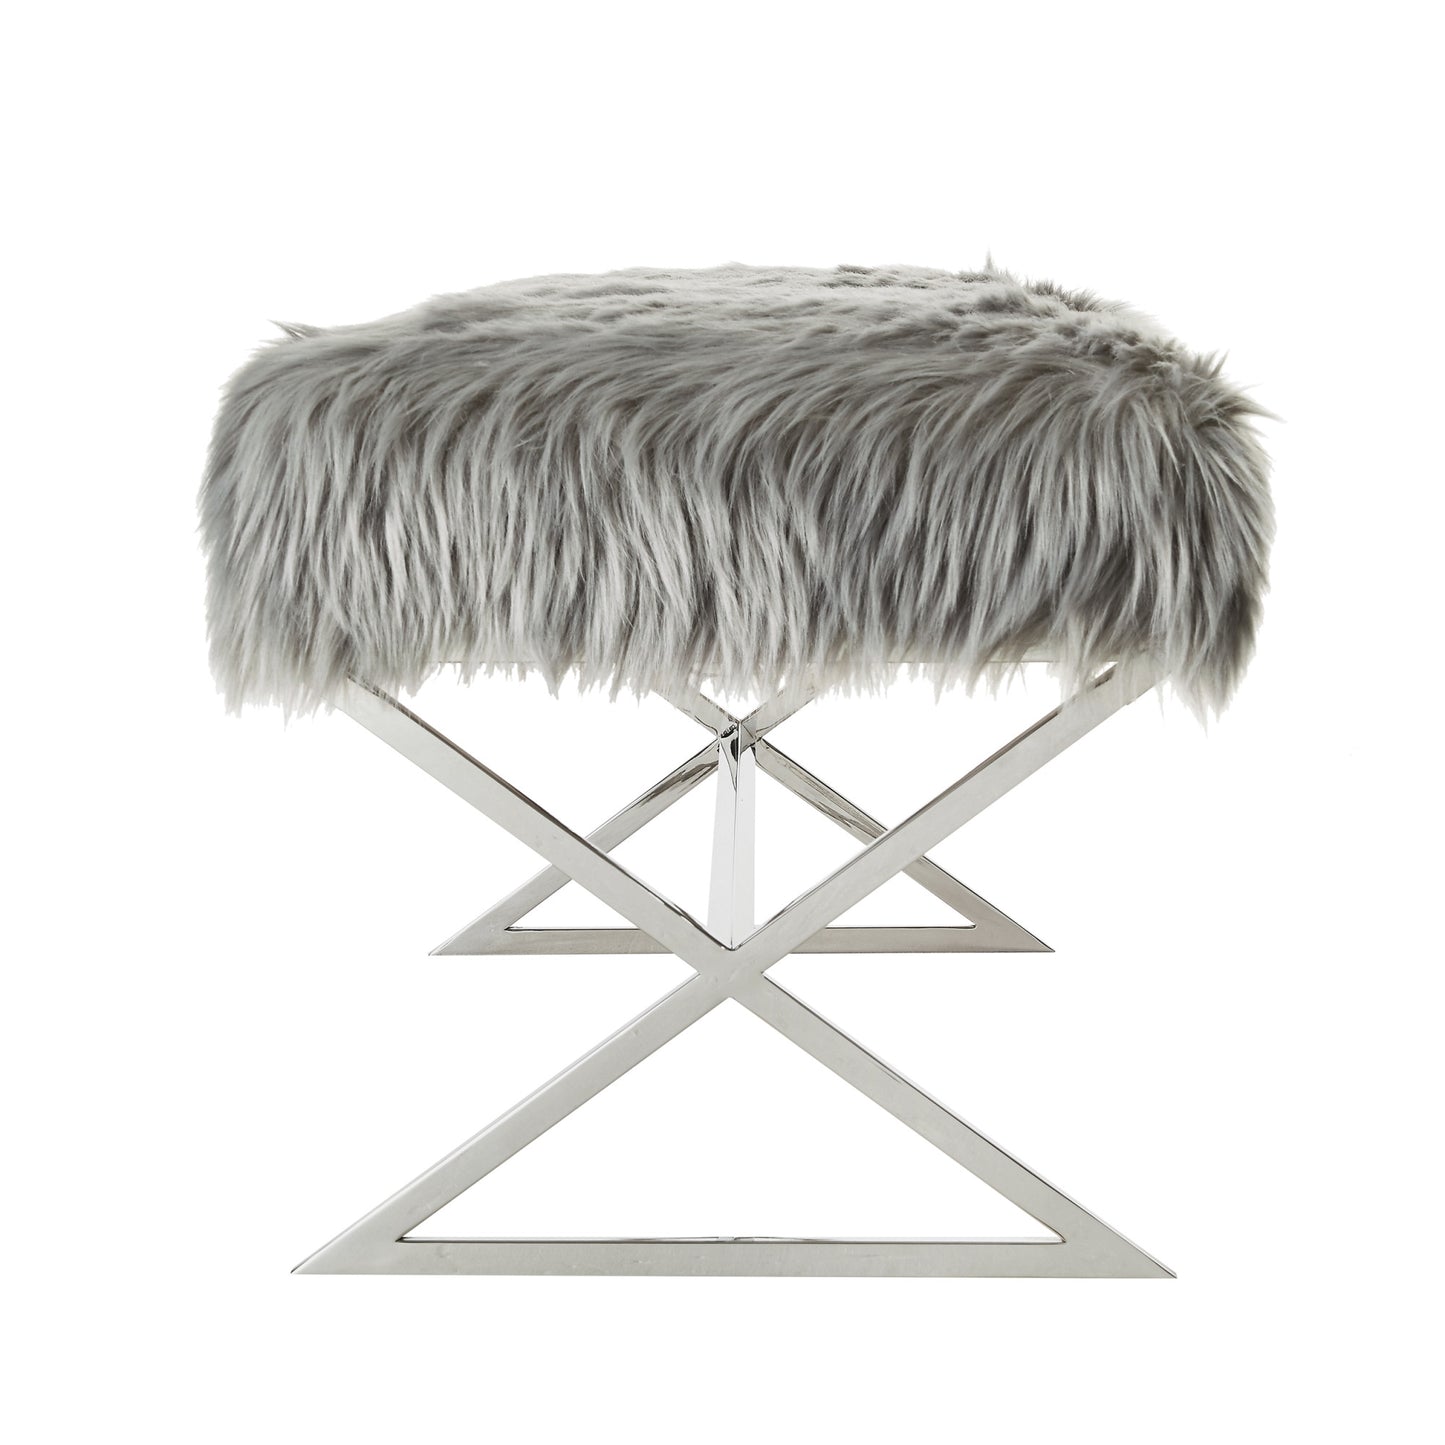 48" Gray And Silver Upholstered Faux Fur Bench By Homeroots